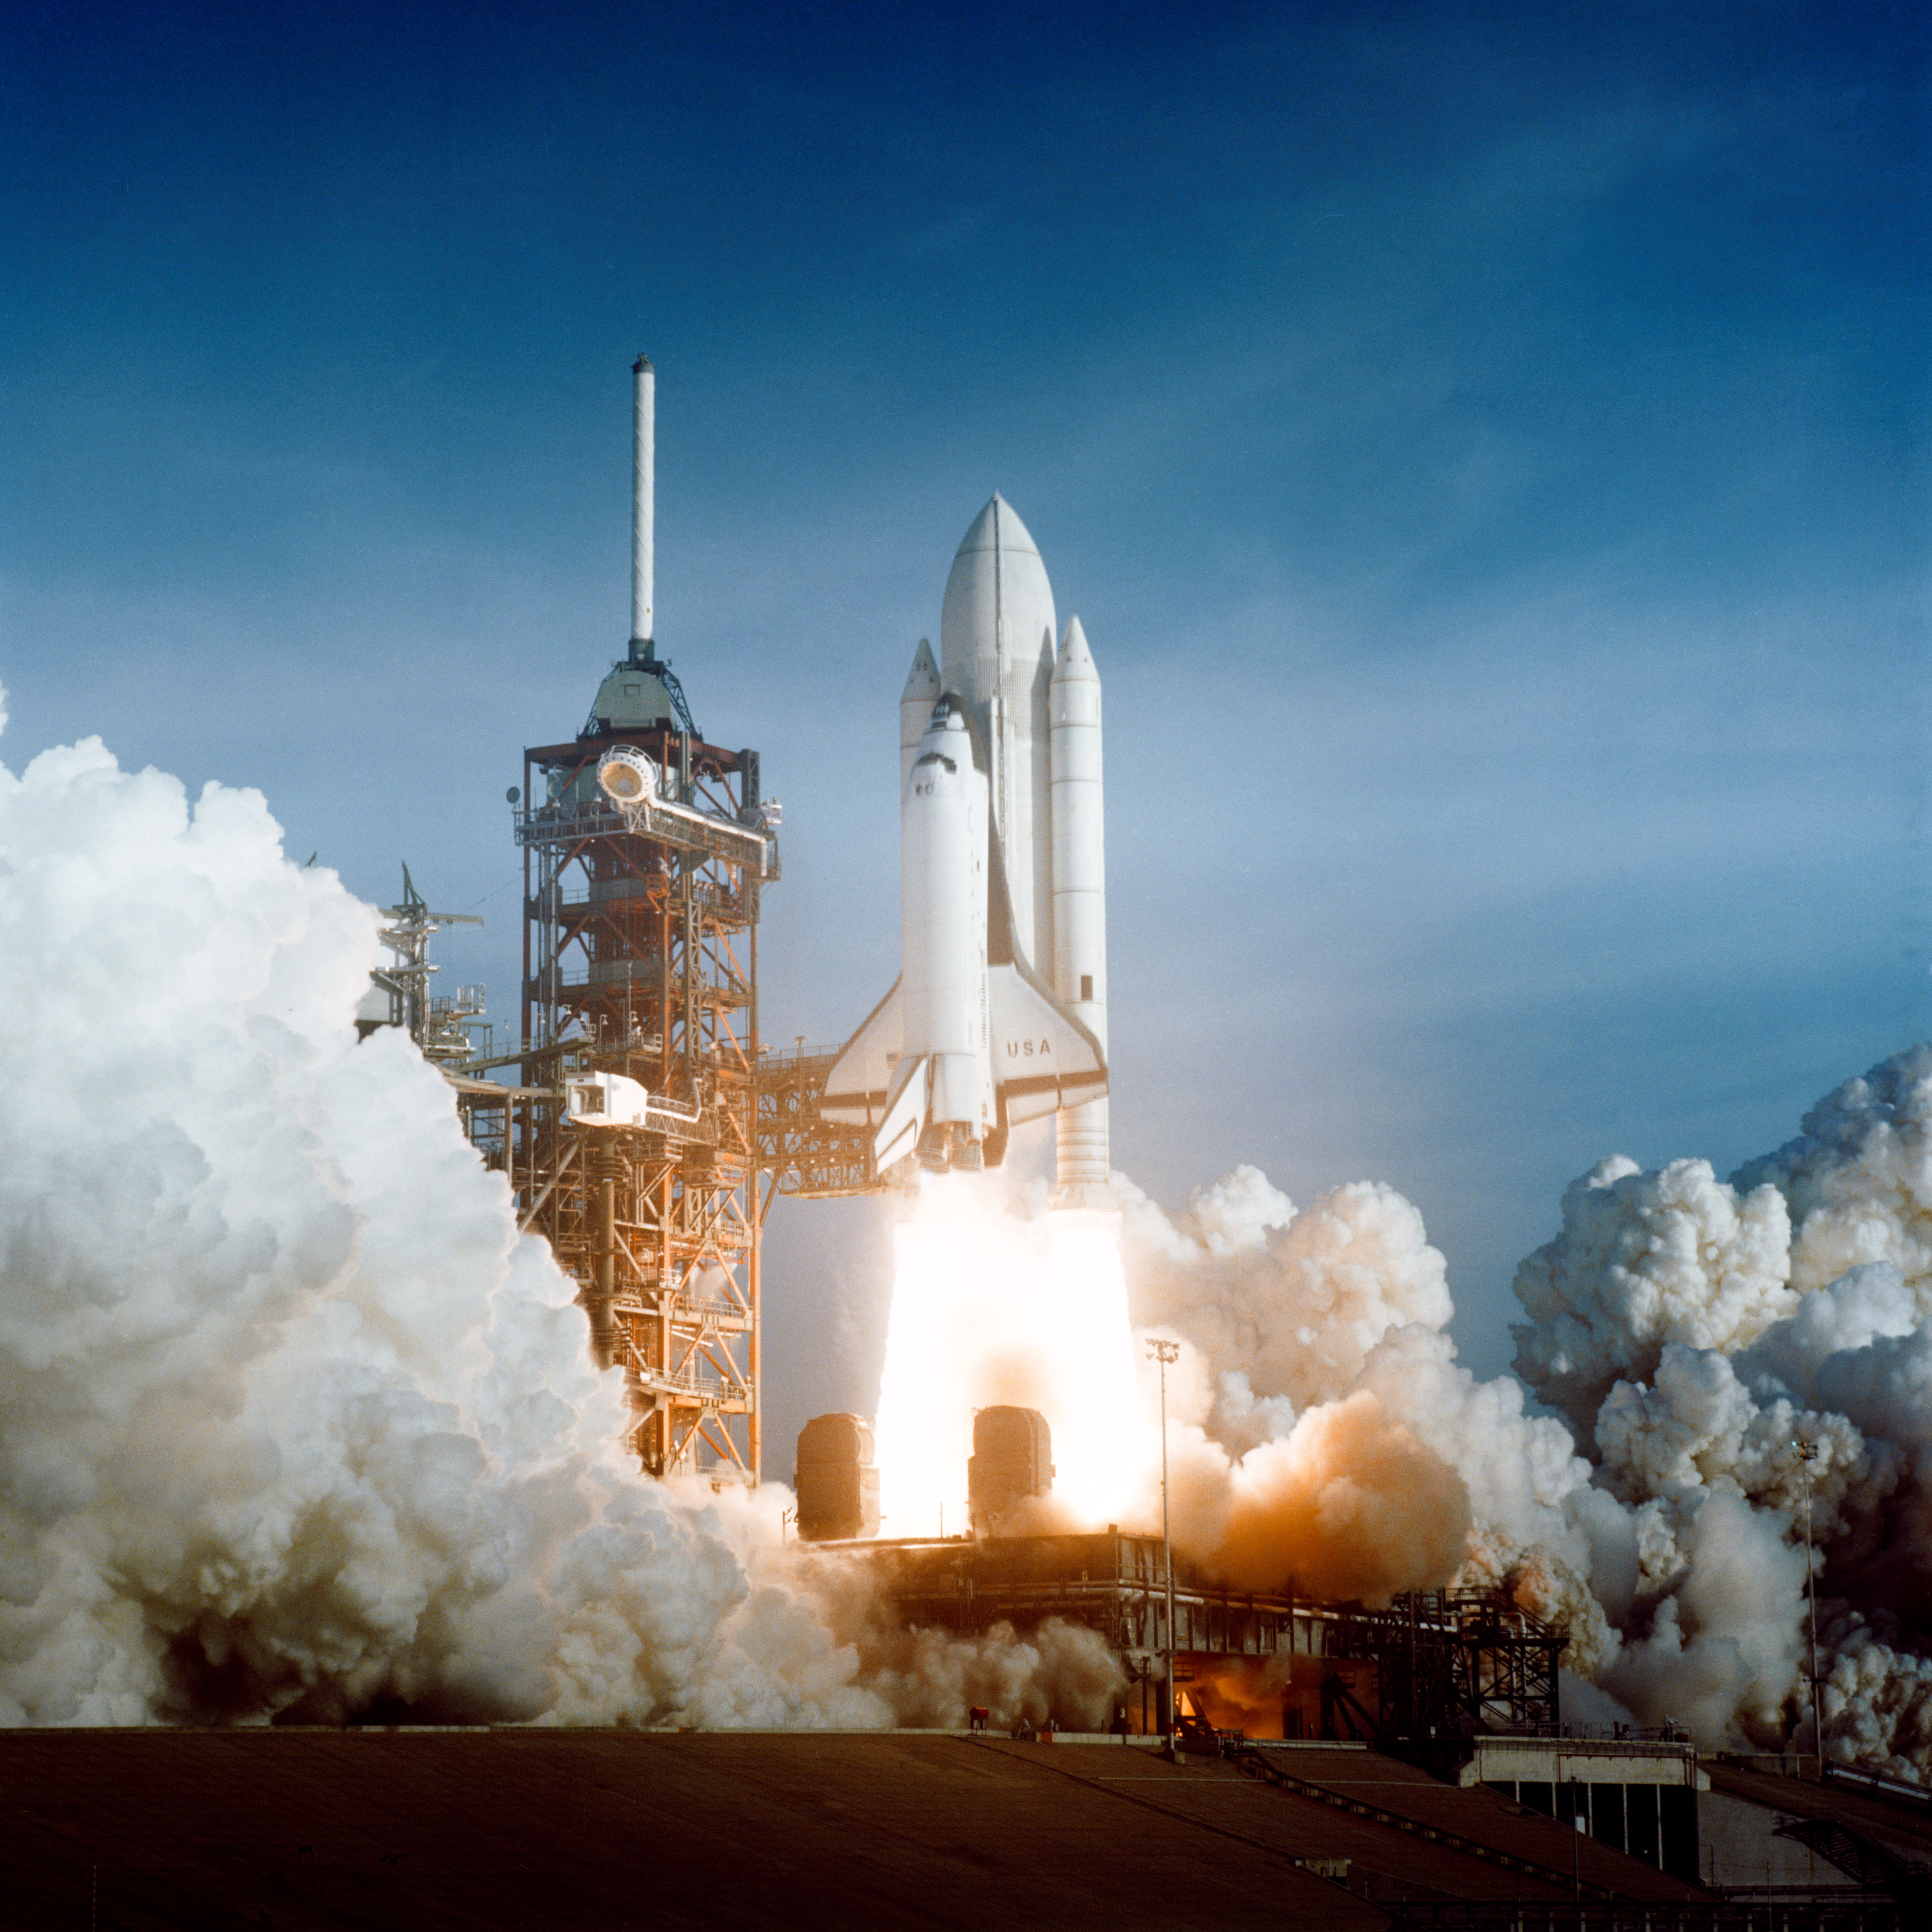 First launch of the space shuttle in 1981